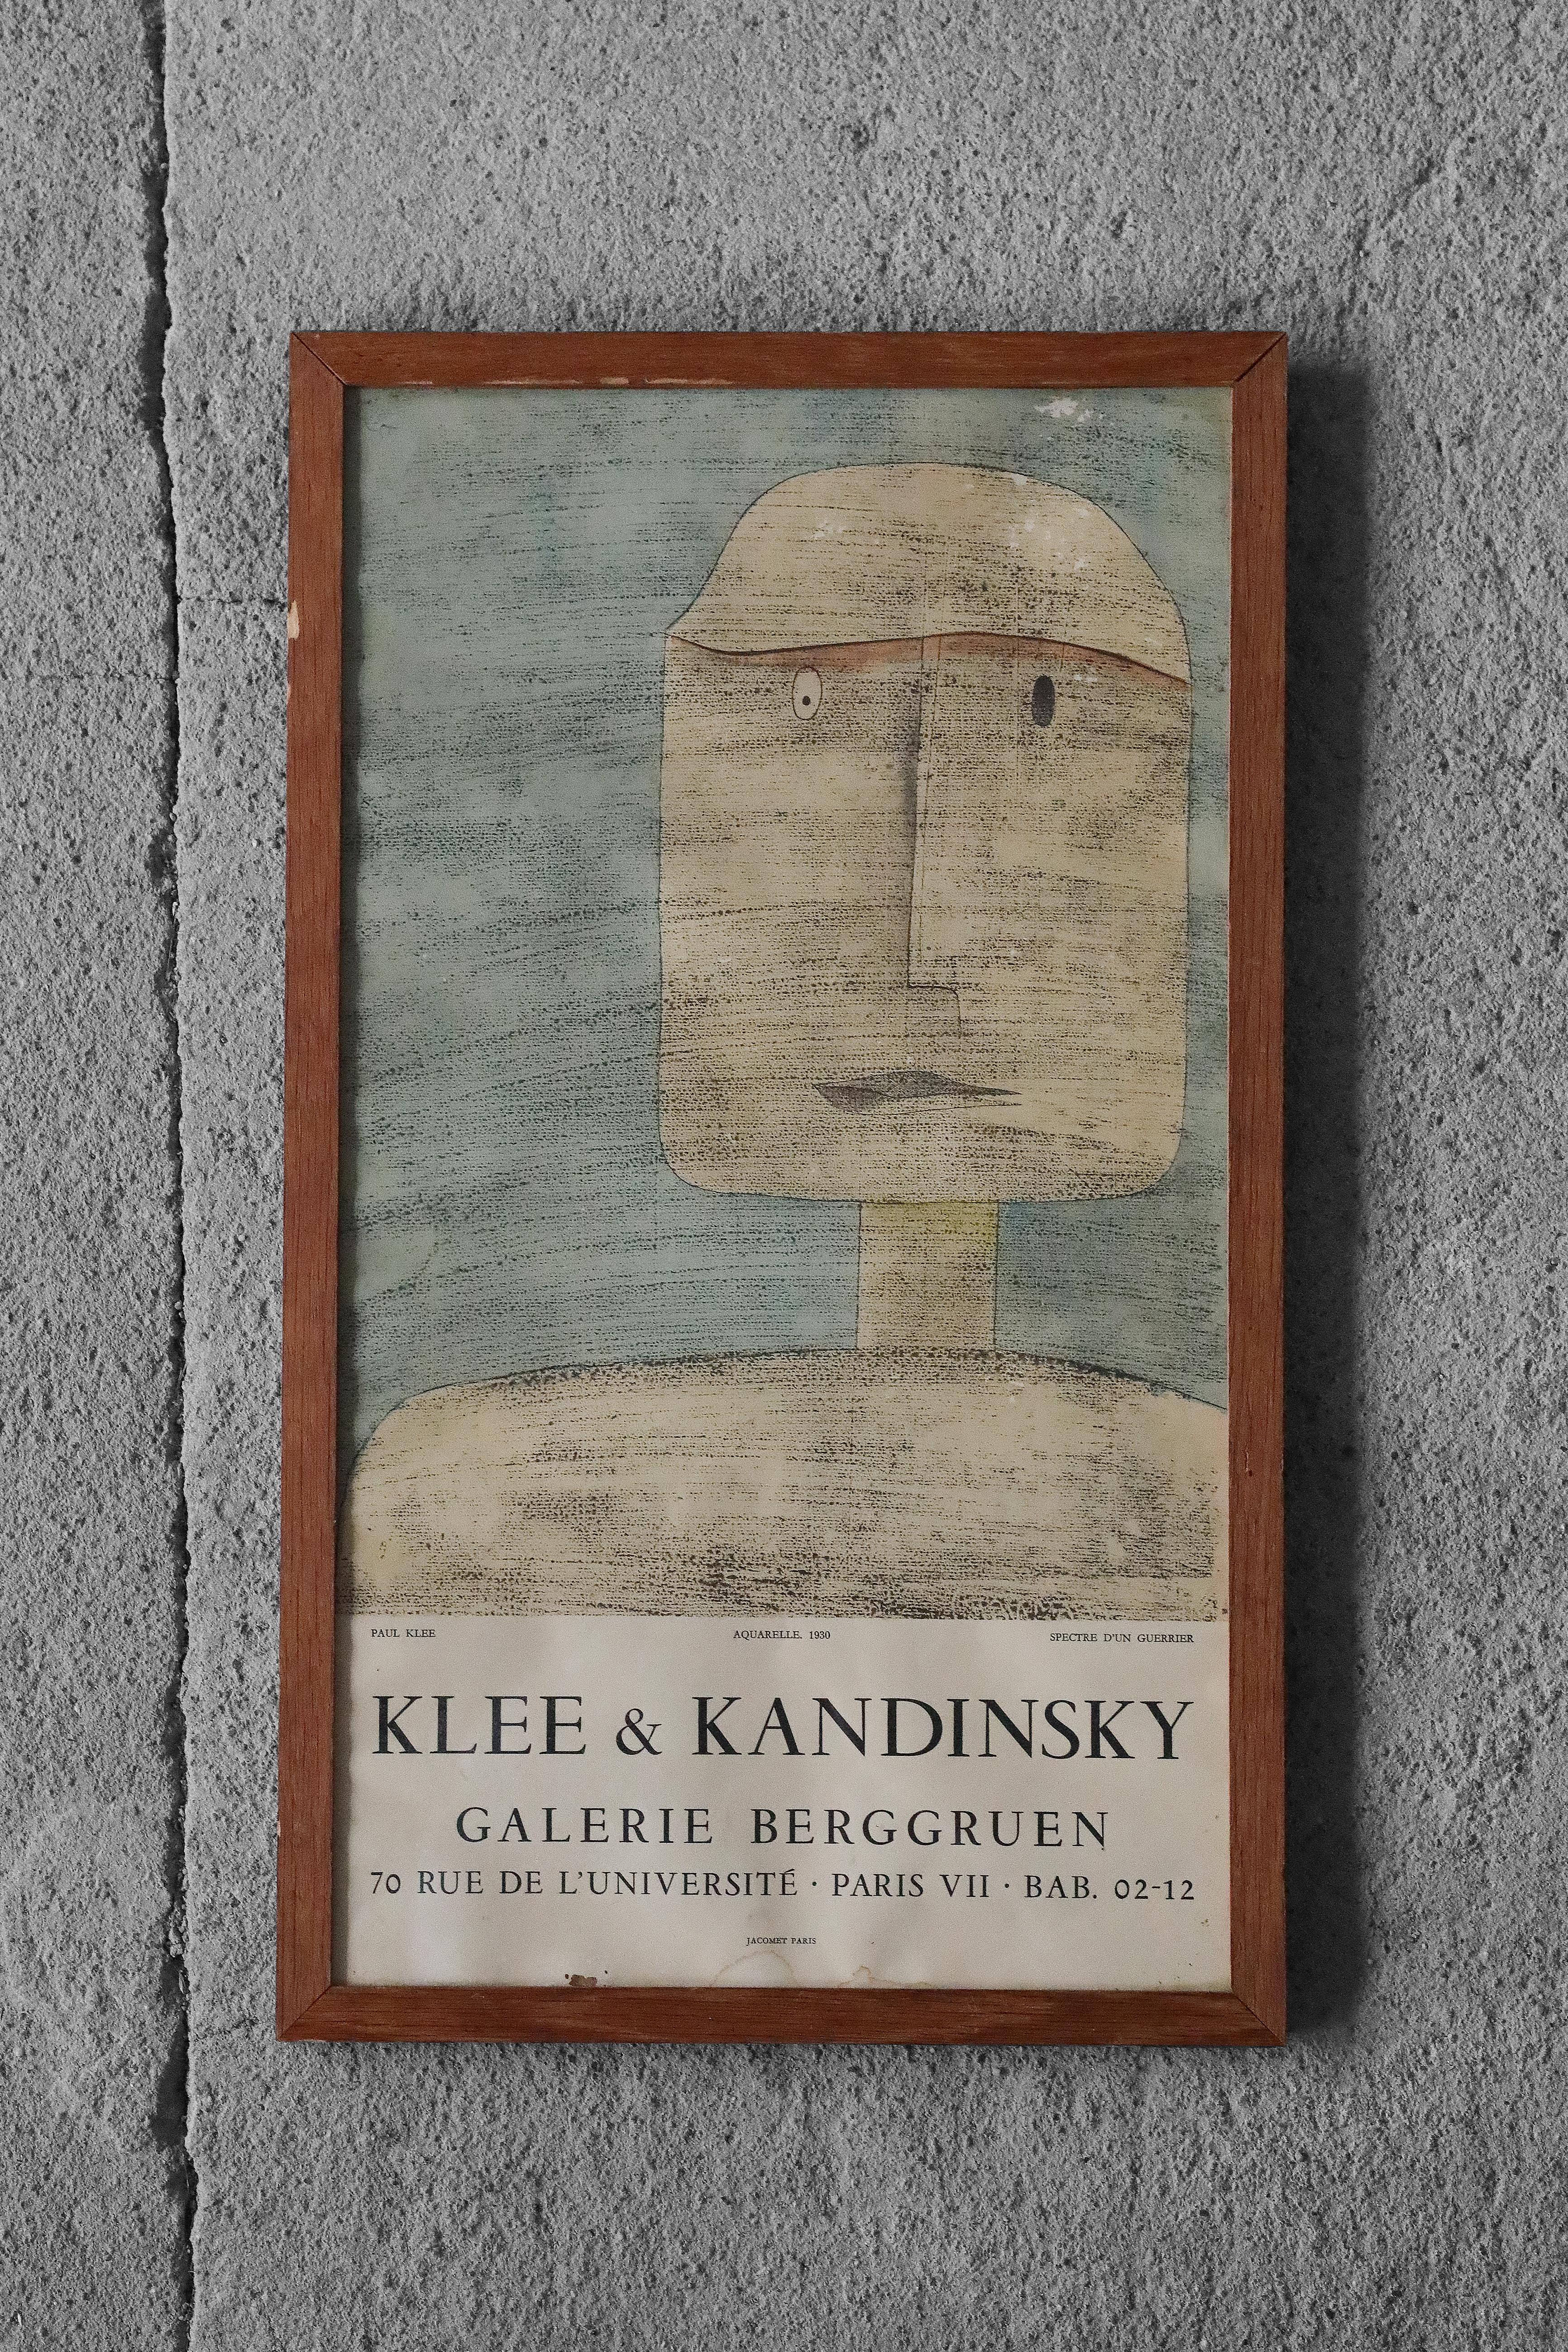 Original poster from 1960s by the prestigious Galerie Berggruen in Paris, printed on the occasion of the exhibition of works by Paul Klee and Wassily Kandinsky. The poster shows Paul Klee's watercolor Specter d'un Guerrier from 1930. The poster